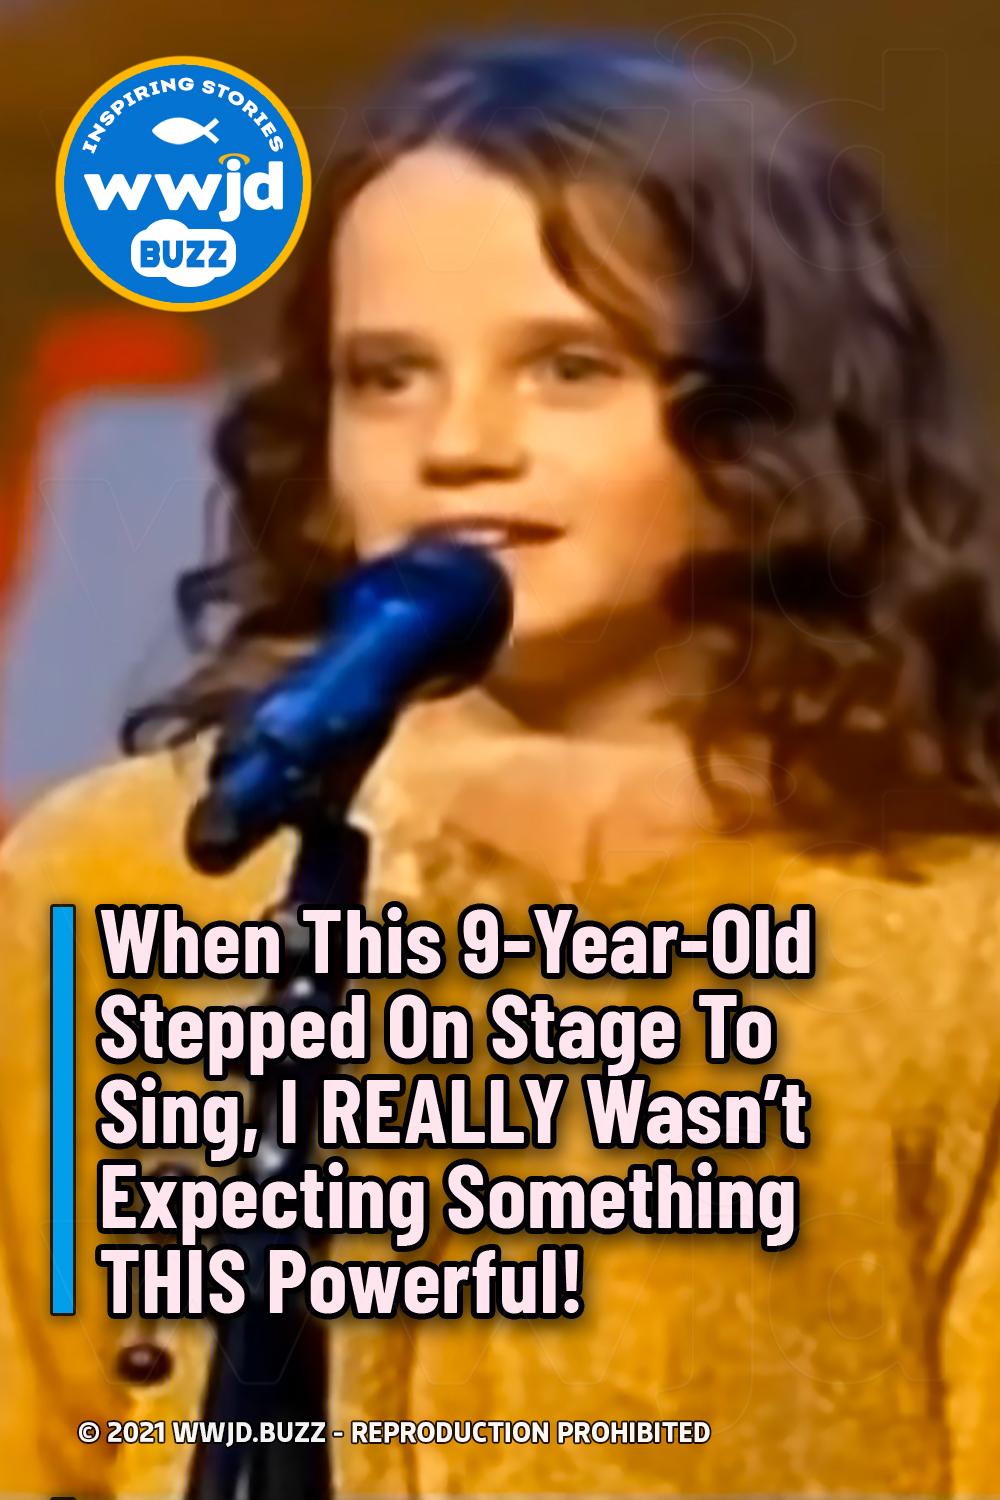 When This 9-Year-Old Stepped On Stage To Sing, I REALLY Wasn\'t Expecting Something THIS Powerful!